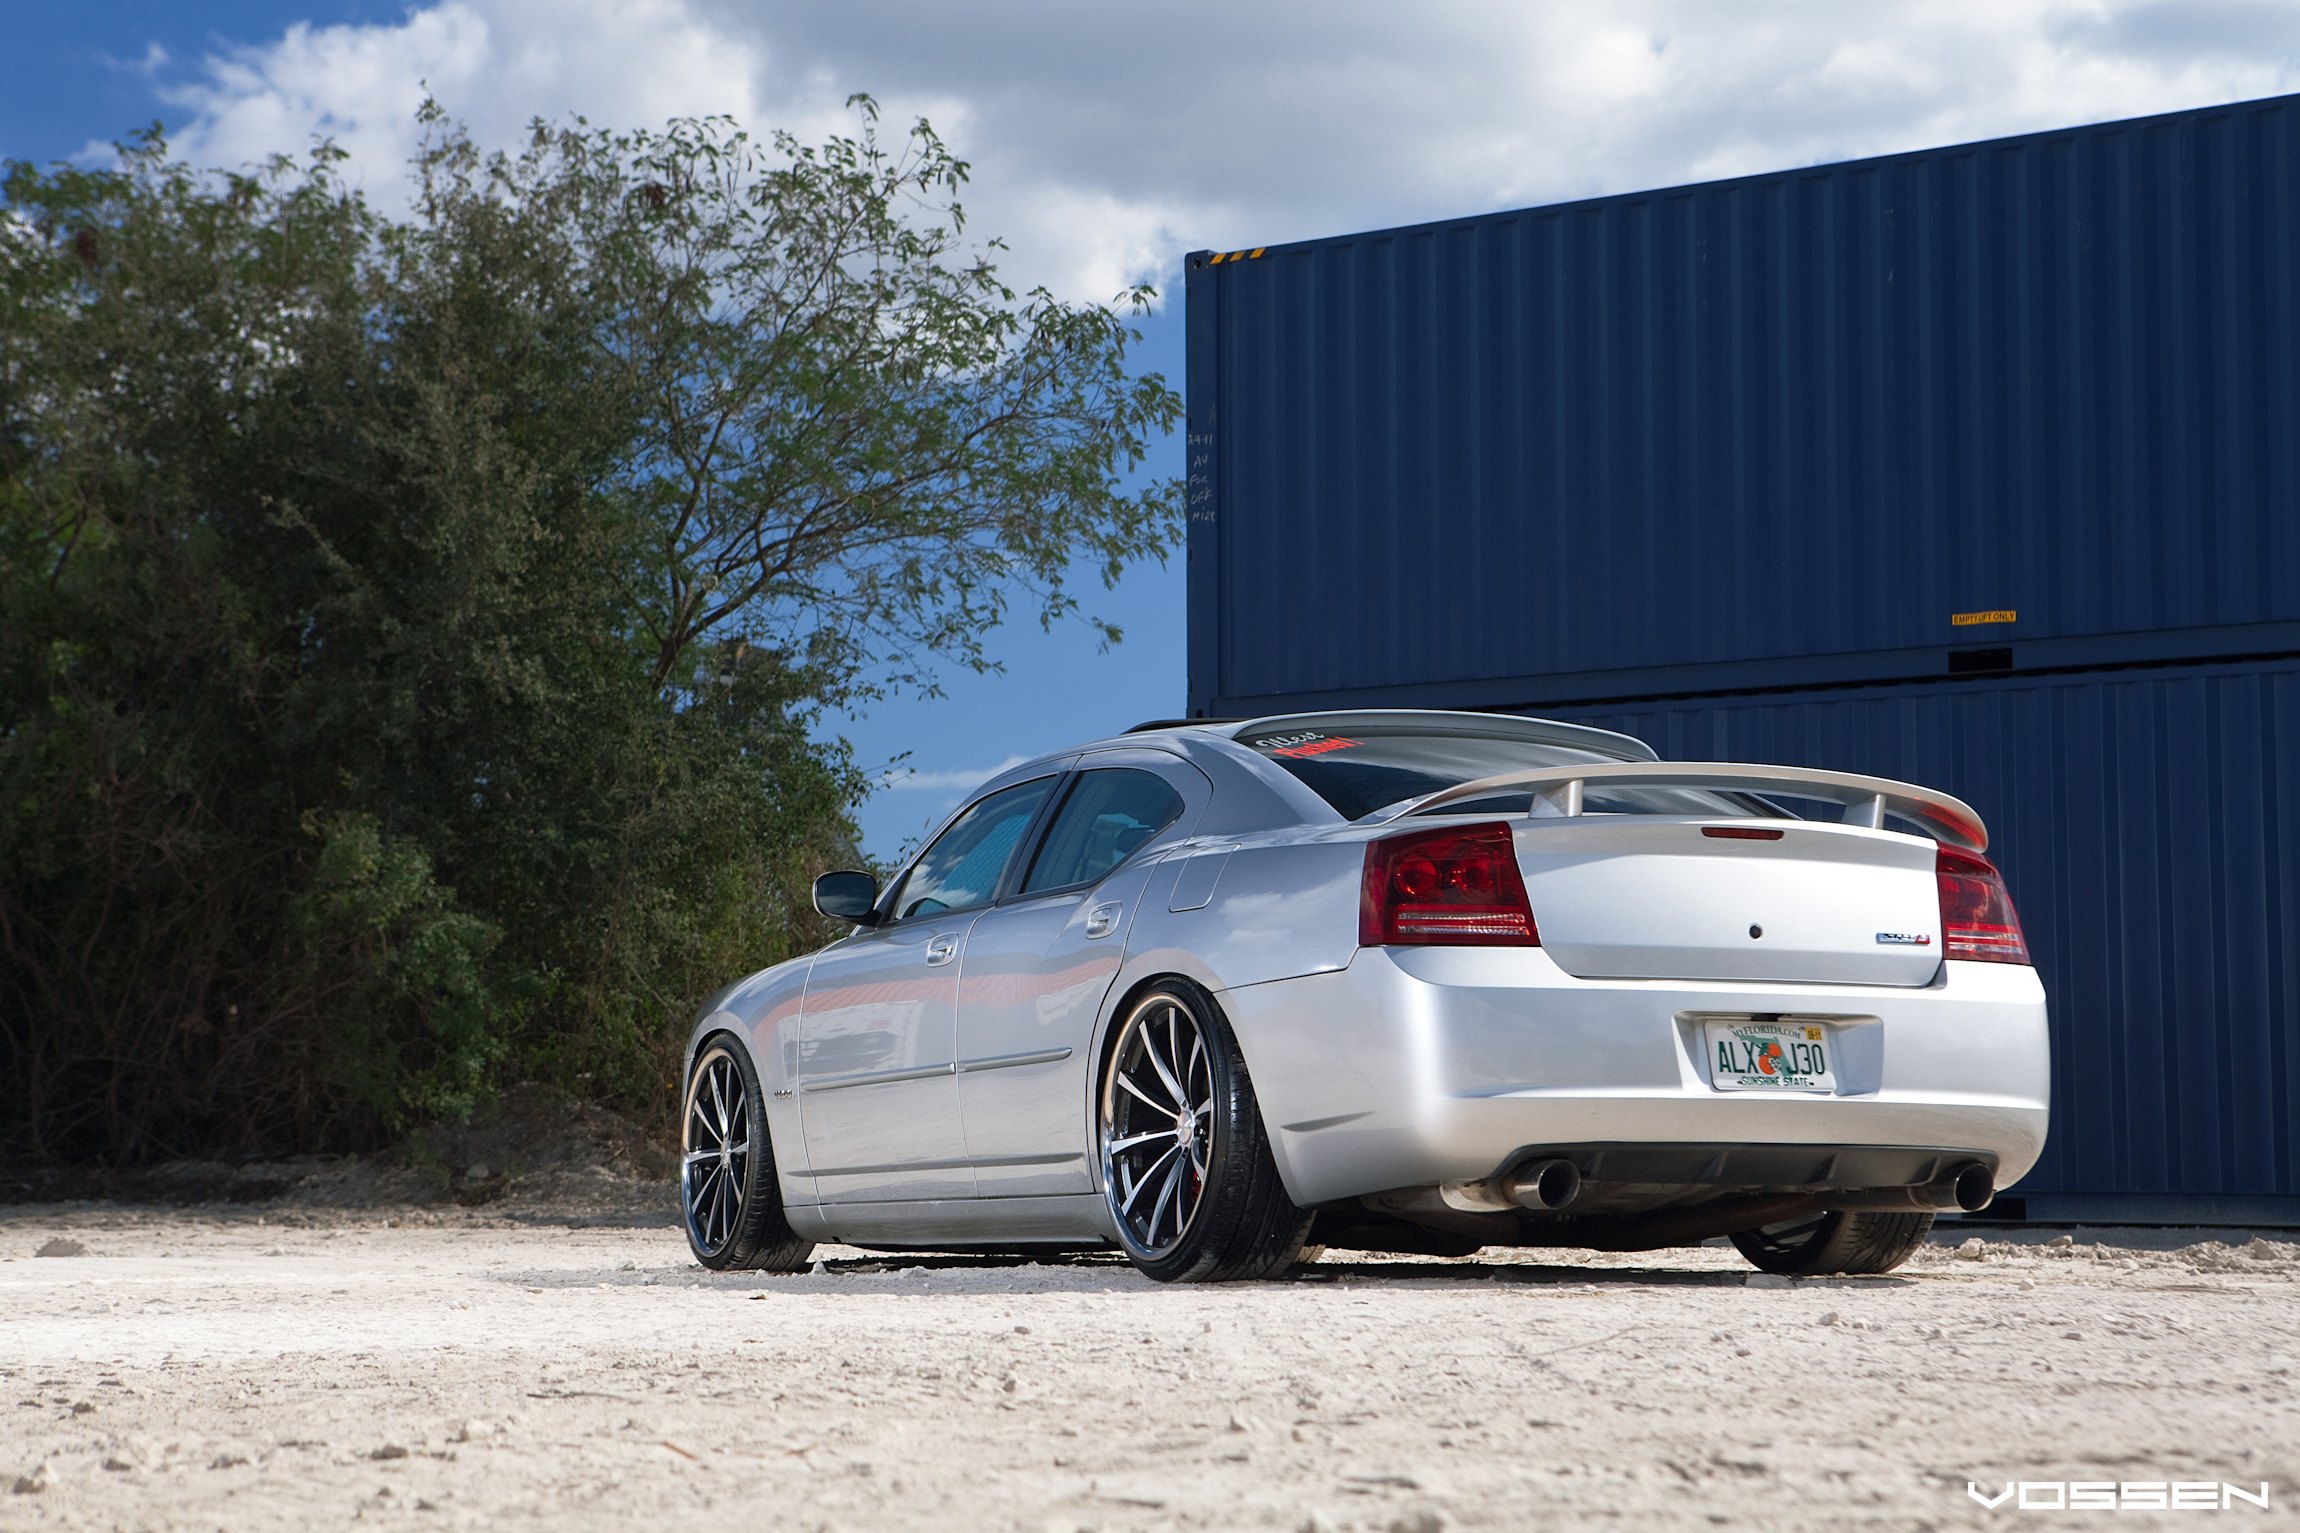 Chrome Vossen Wheels on Silver Dodge Charger - Photo by Vossen